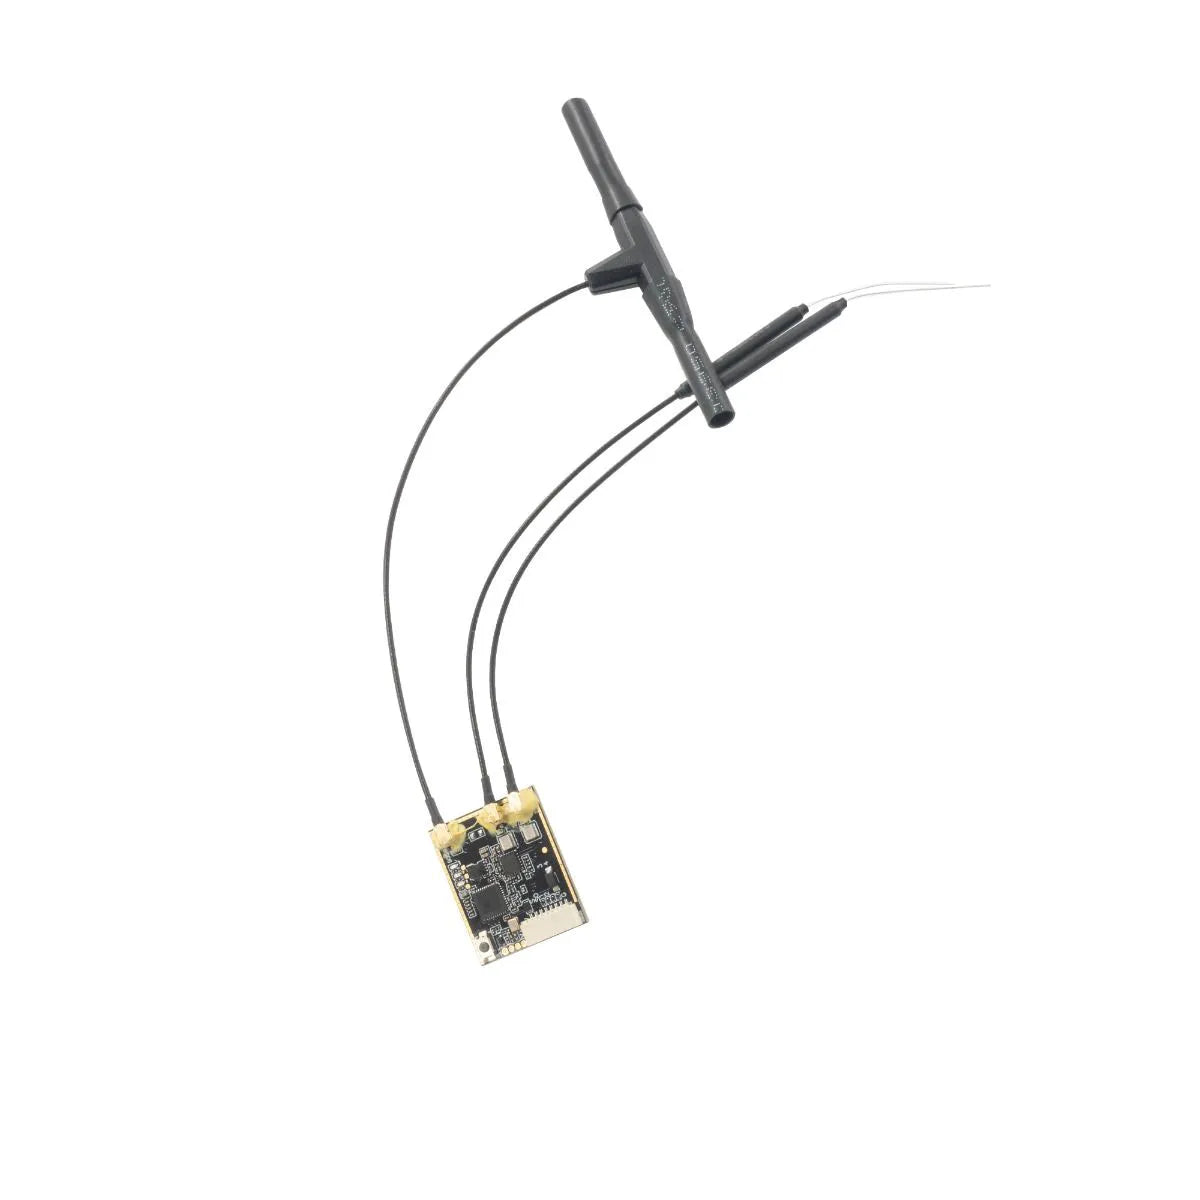 FrSky TD MX Receiver - 2.4G 900M Tandem Dual-Band Receiver 4 PWM channels